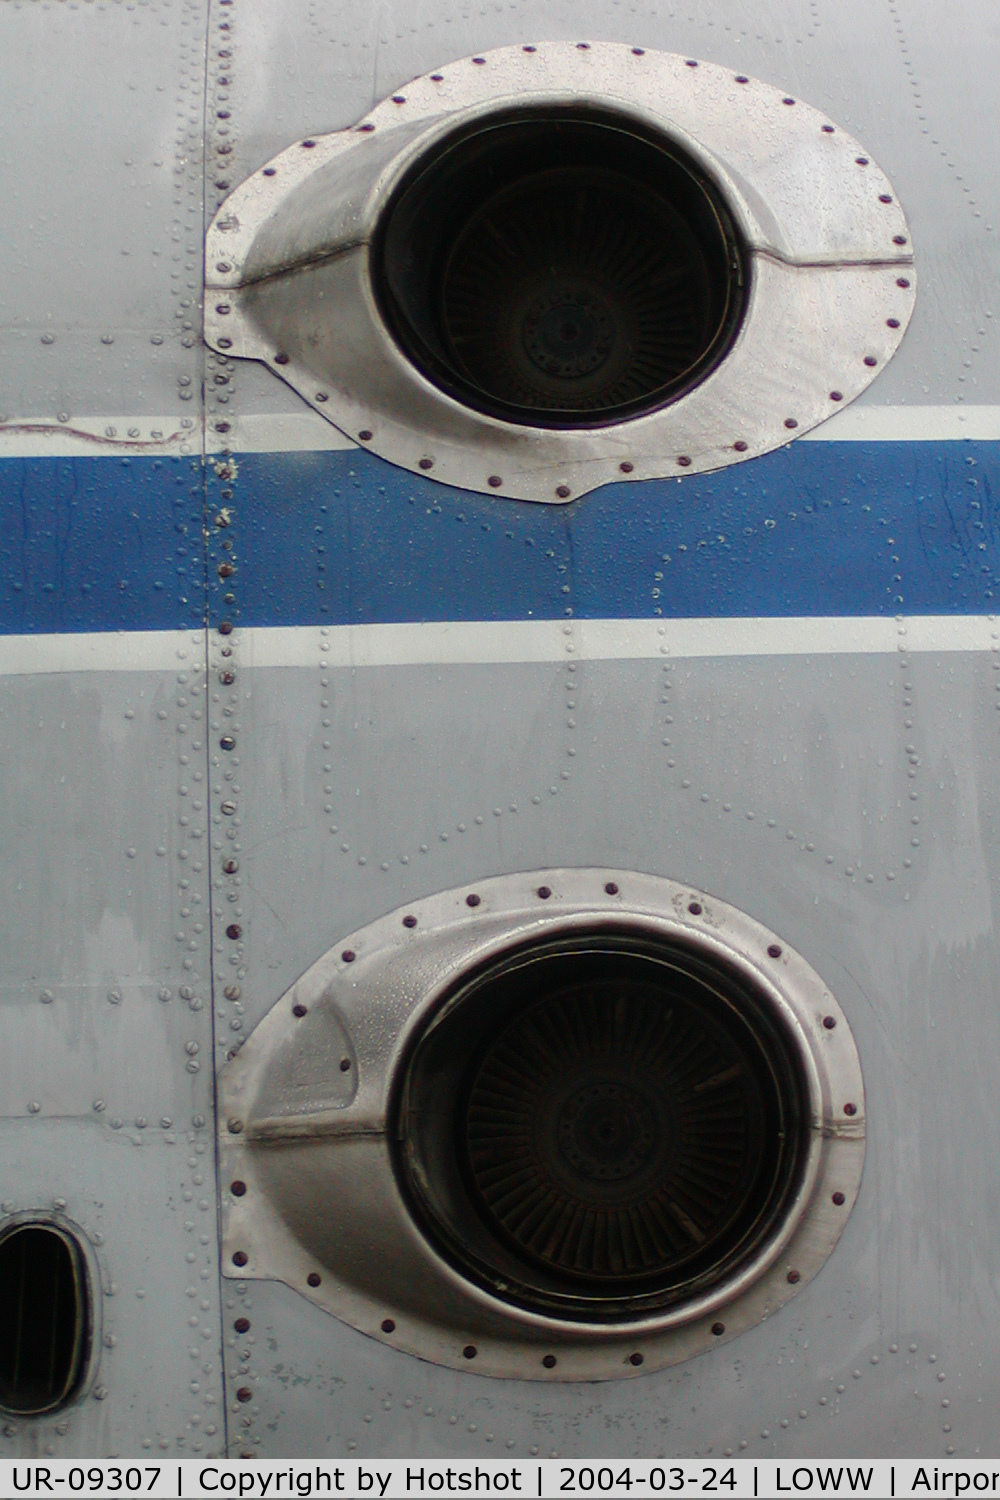 UR-09307, 1974 Antonov An-22A C/N 043481244, Air exhausts on the right side above the gear bulges